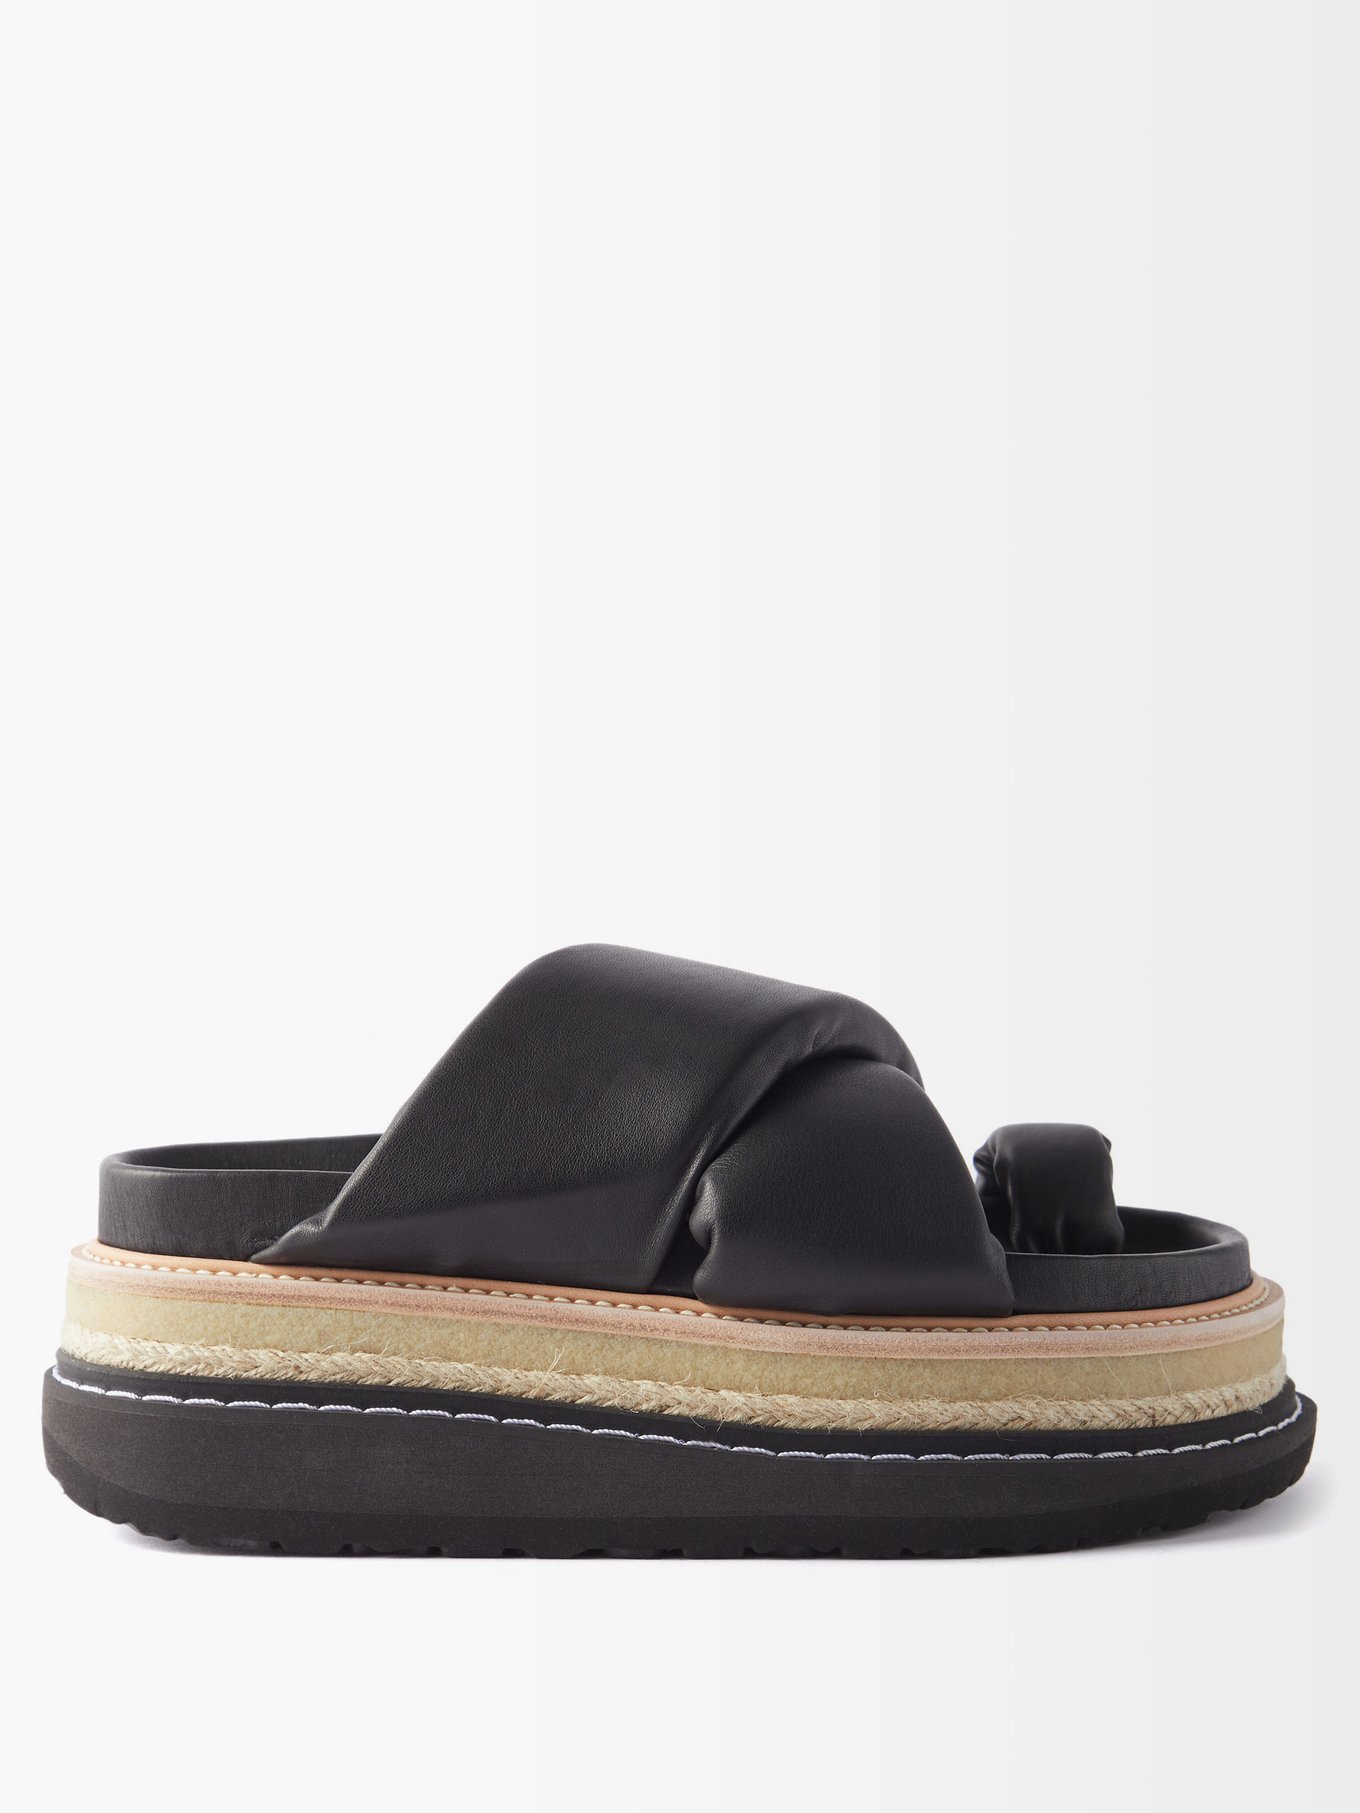 Clarks Trace Drift Leather Sandals in 